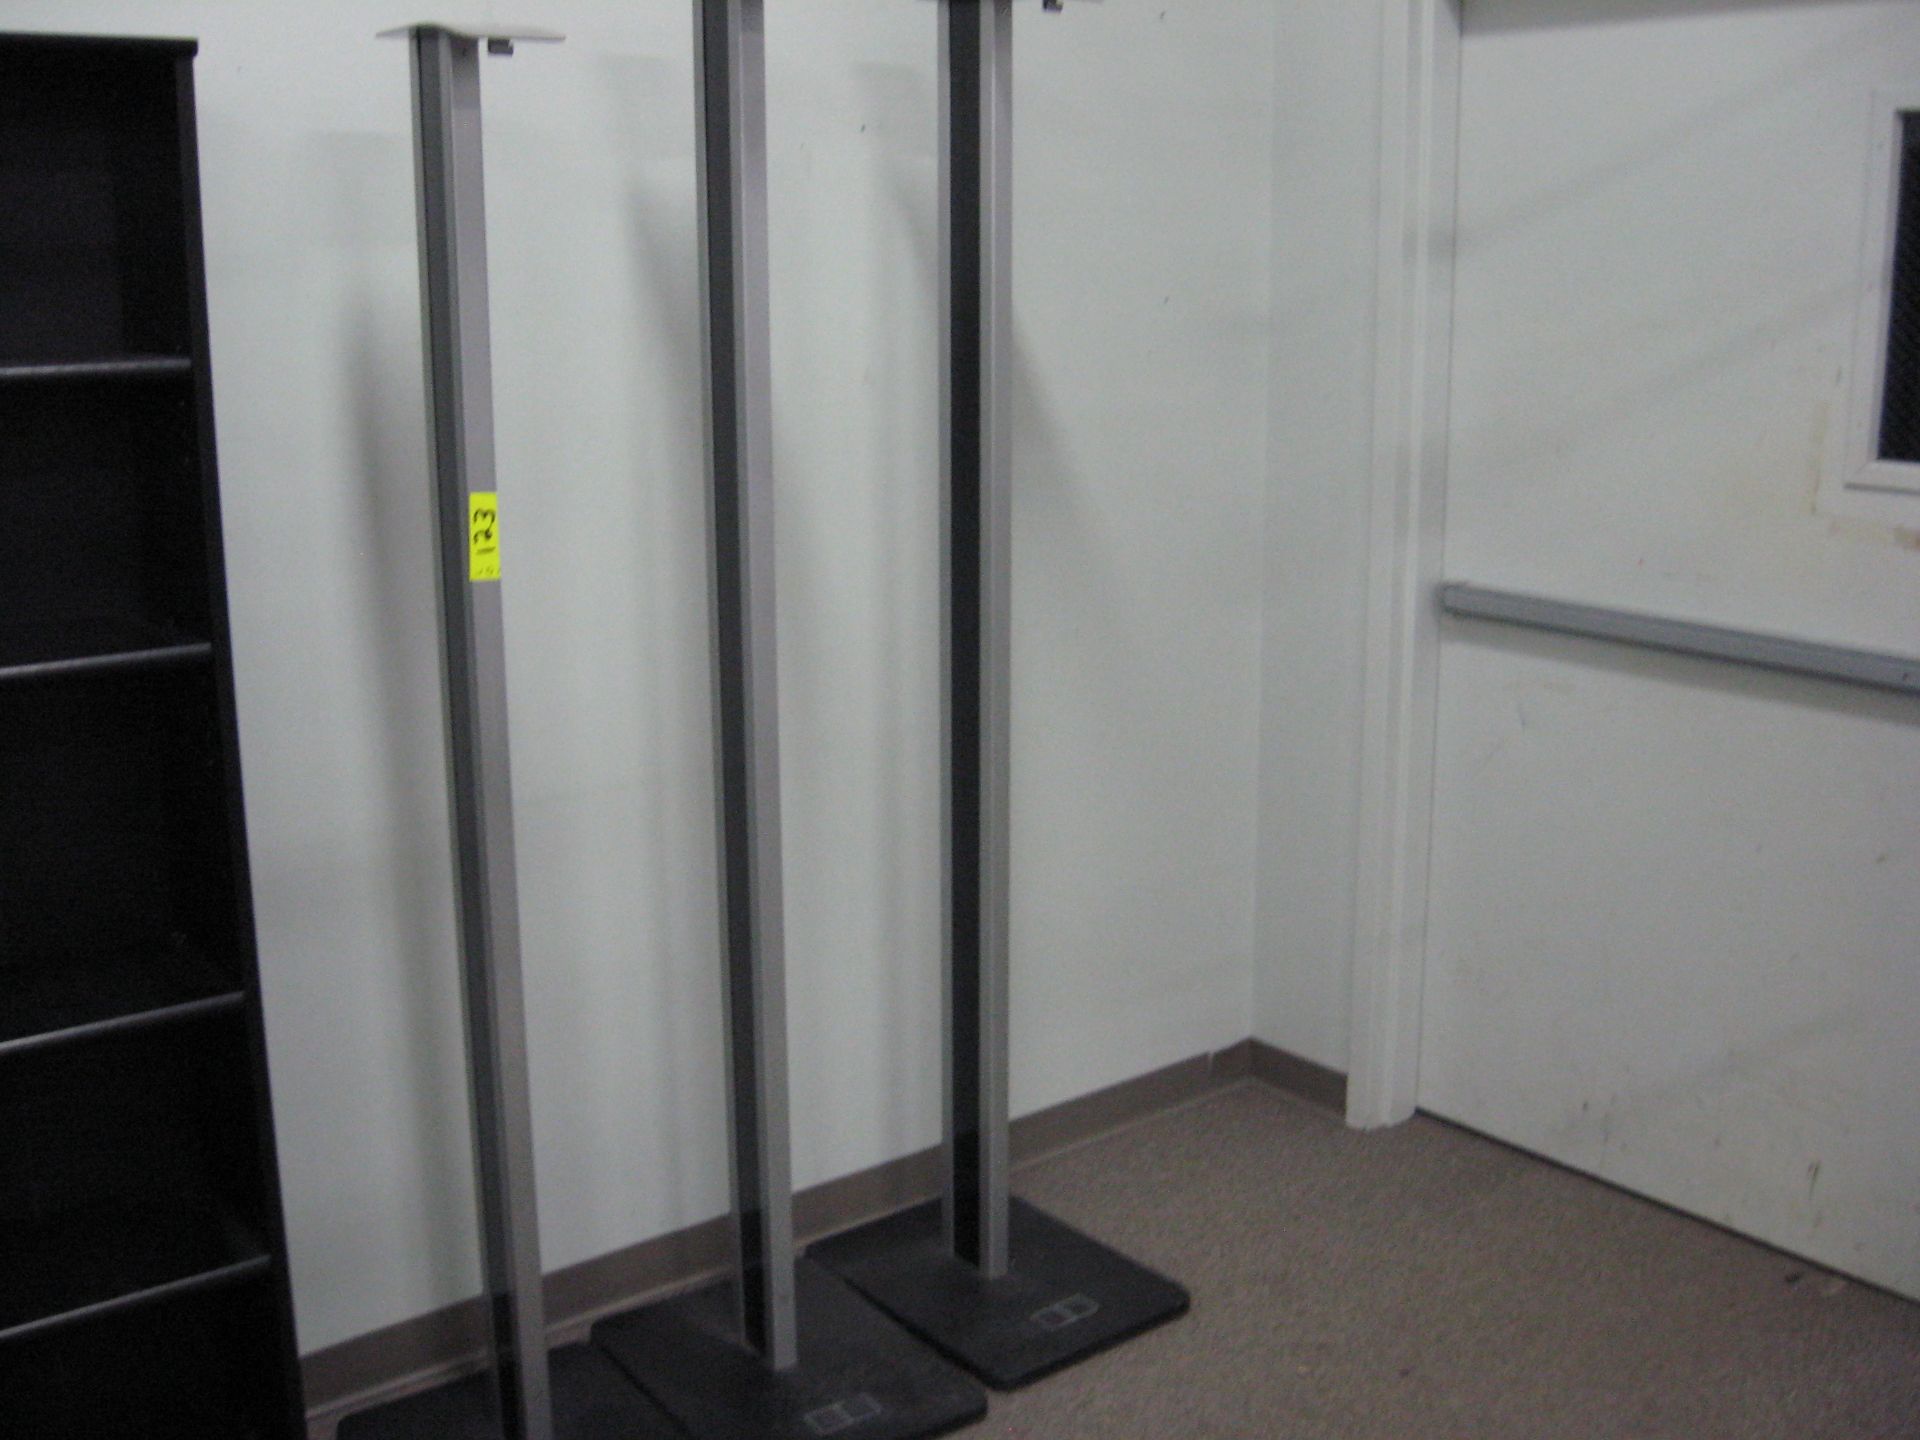 (12) Assorted Clothes Racks, round swivel, 2 tier, single rack. Items are in used condition. - Image 4 of 5